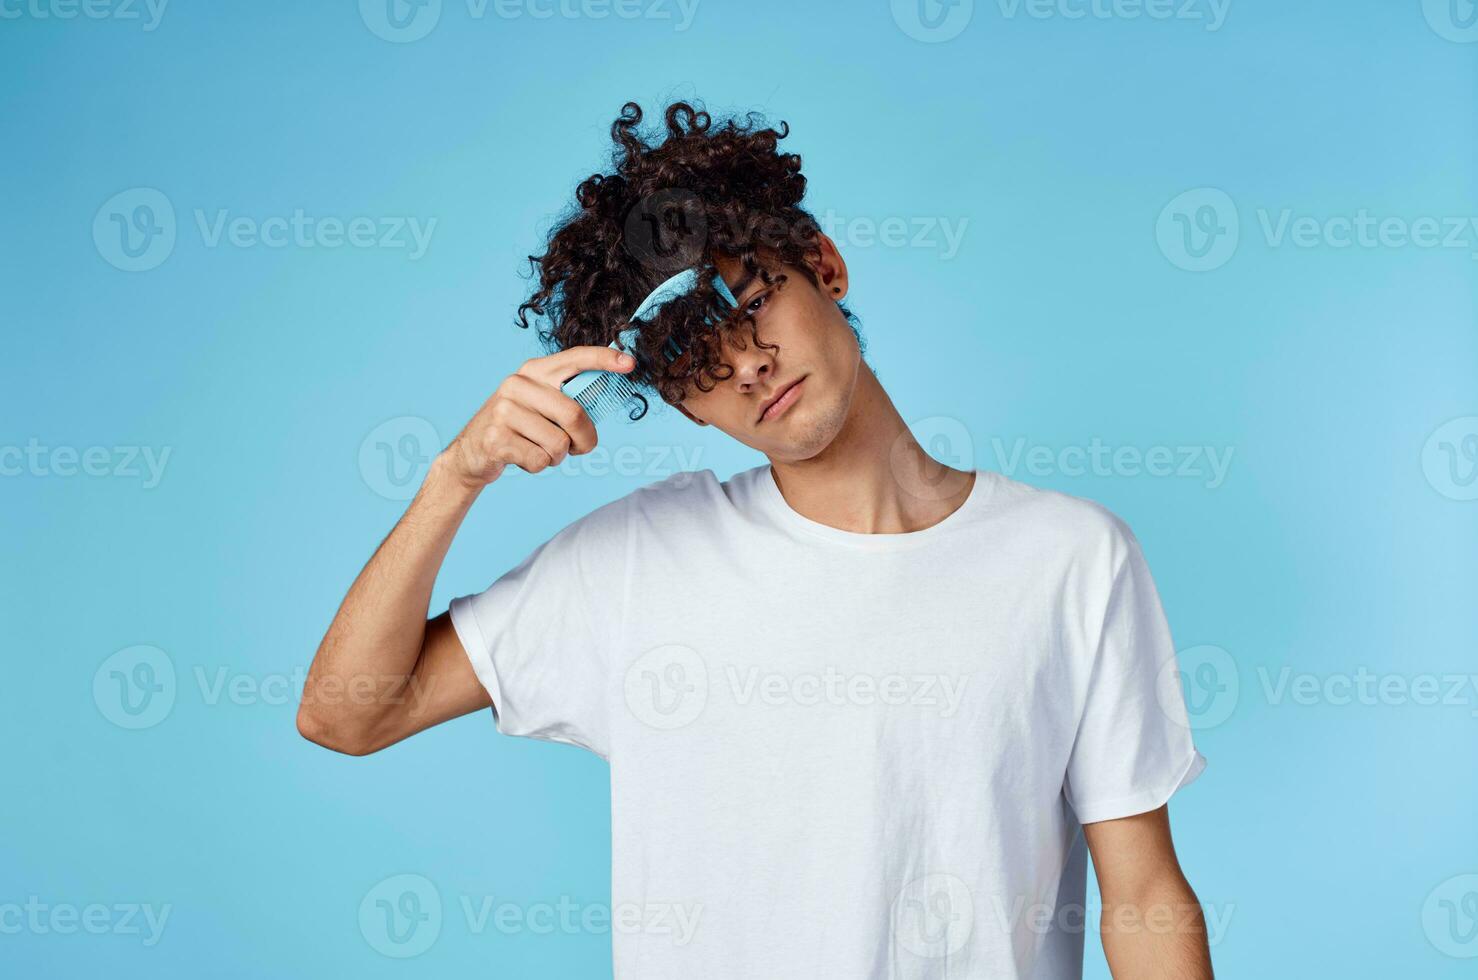 cute man with curly hair holding comb in hand and blue background cropped view photo